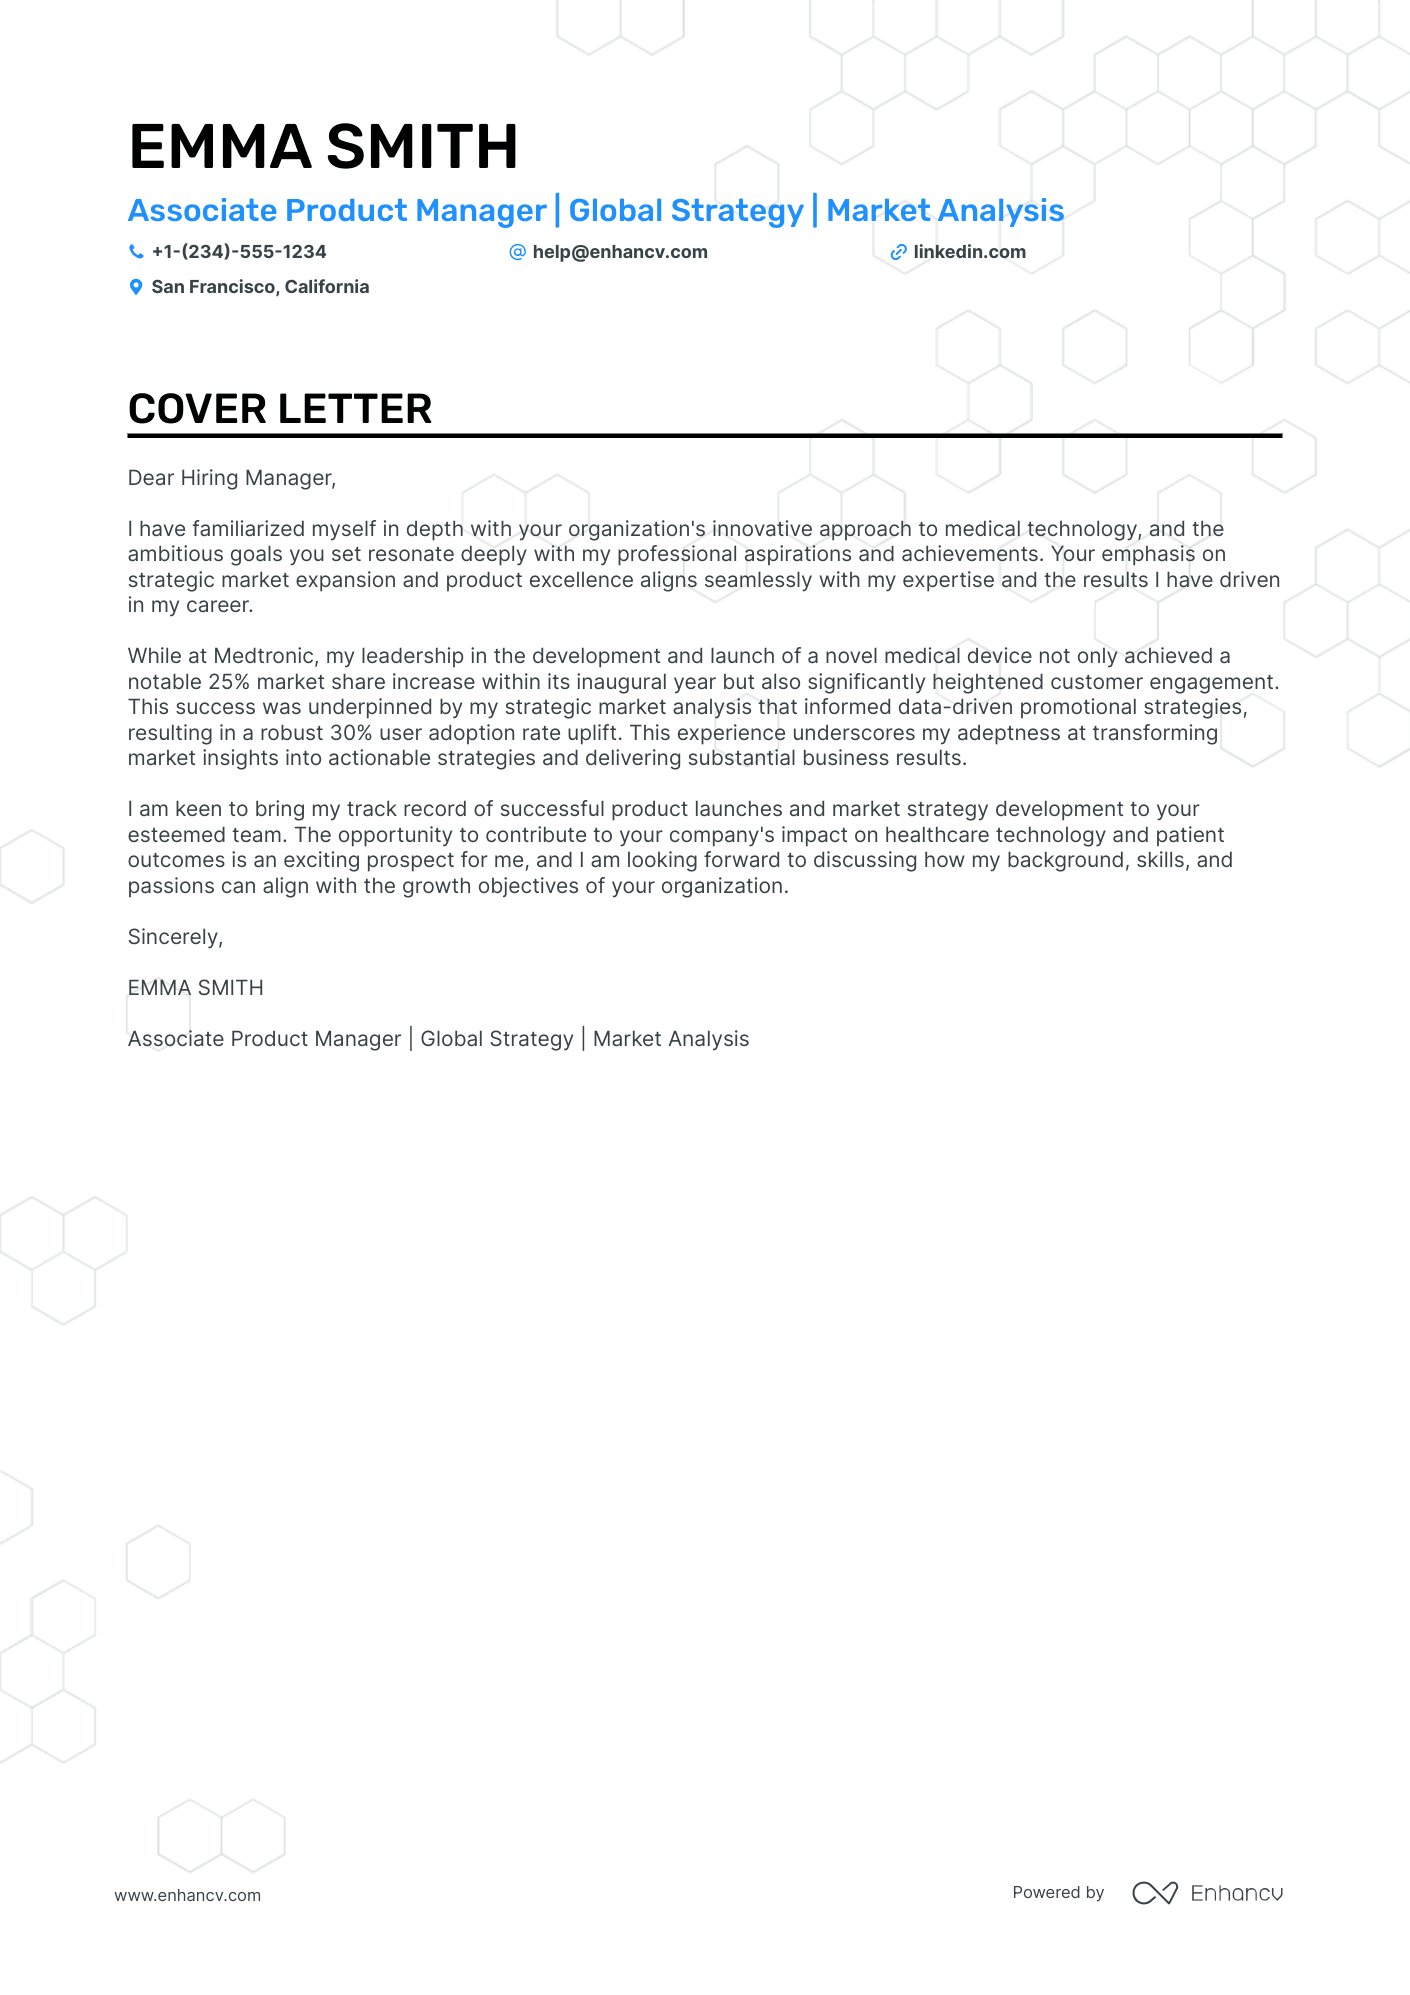 Associate Product Manager cover letter